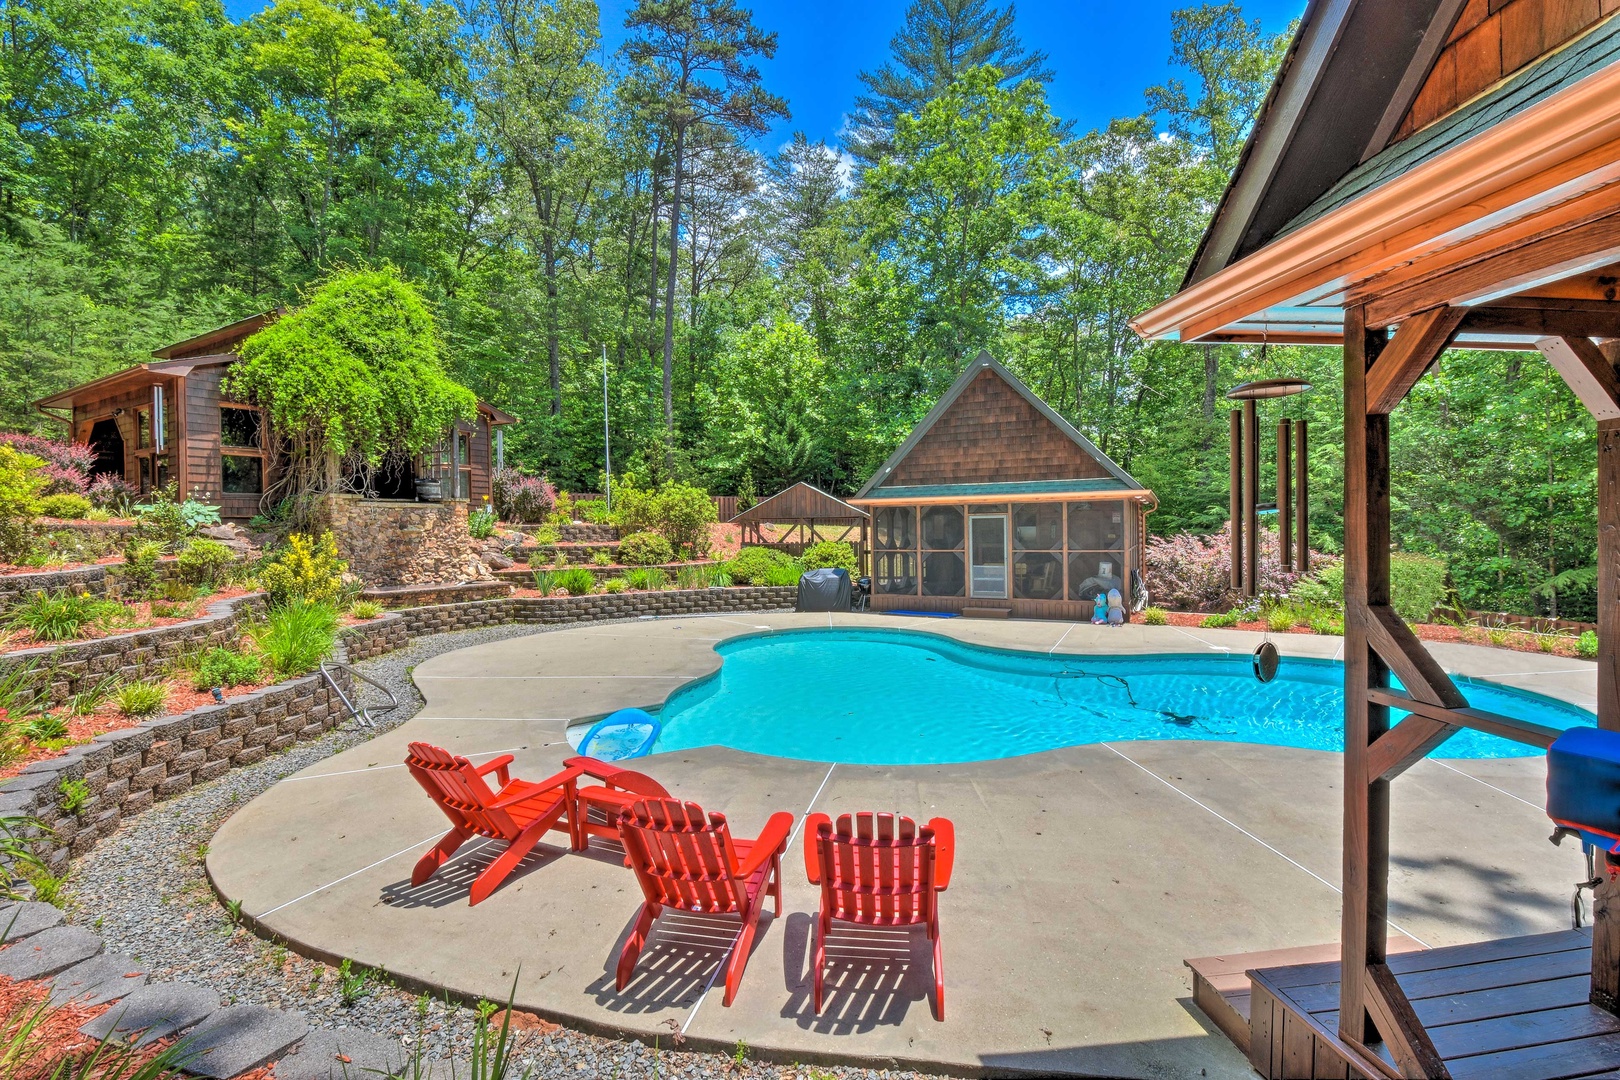 Deer Watch Lodge - Outdoor lounge chairs in the pool